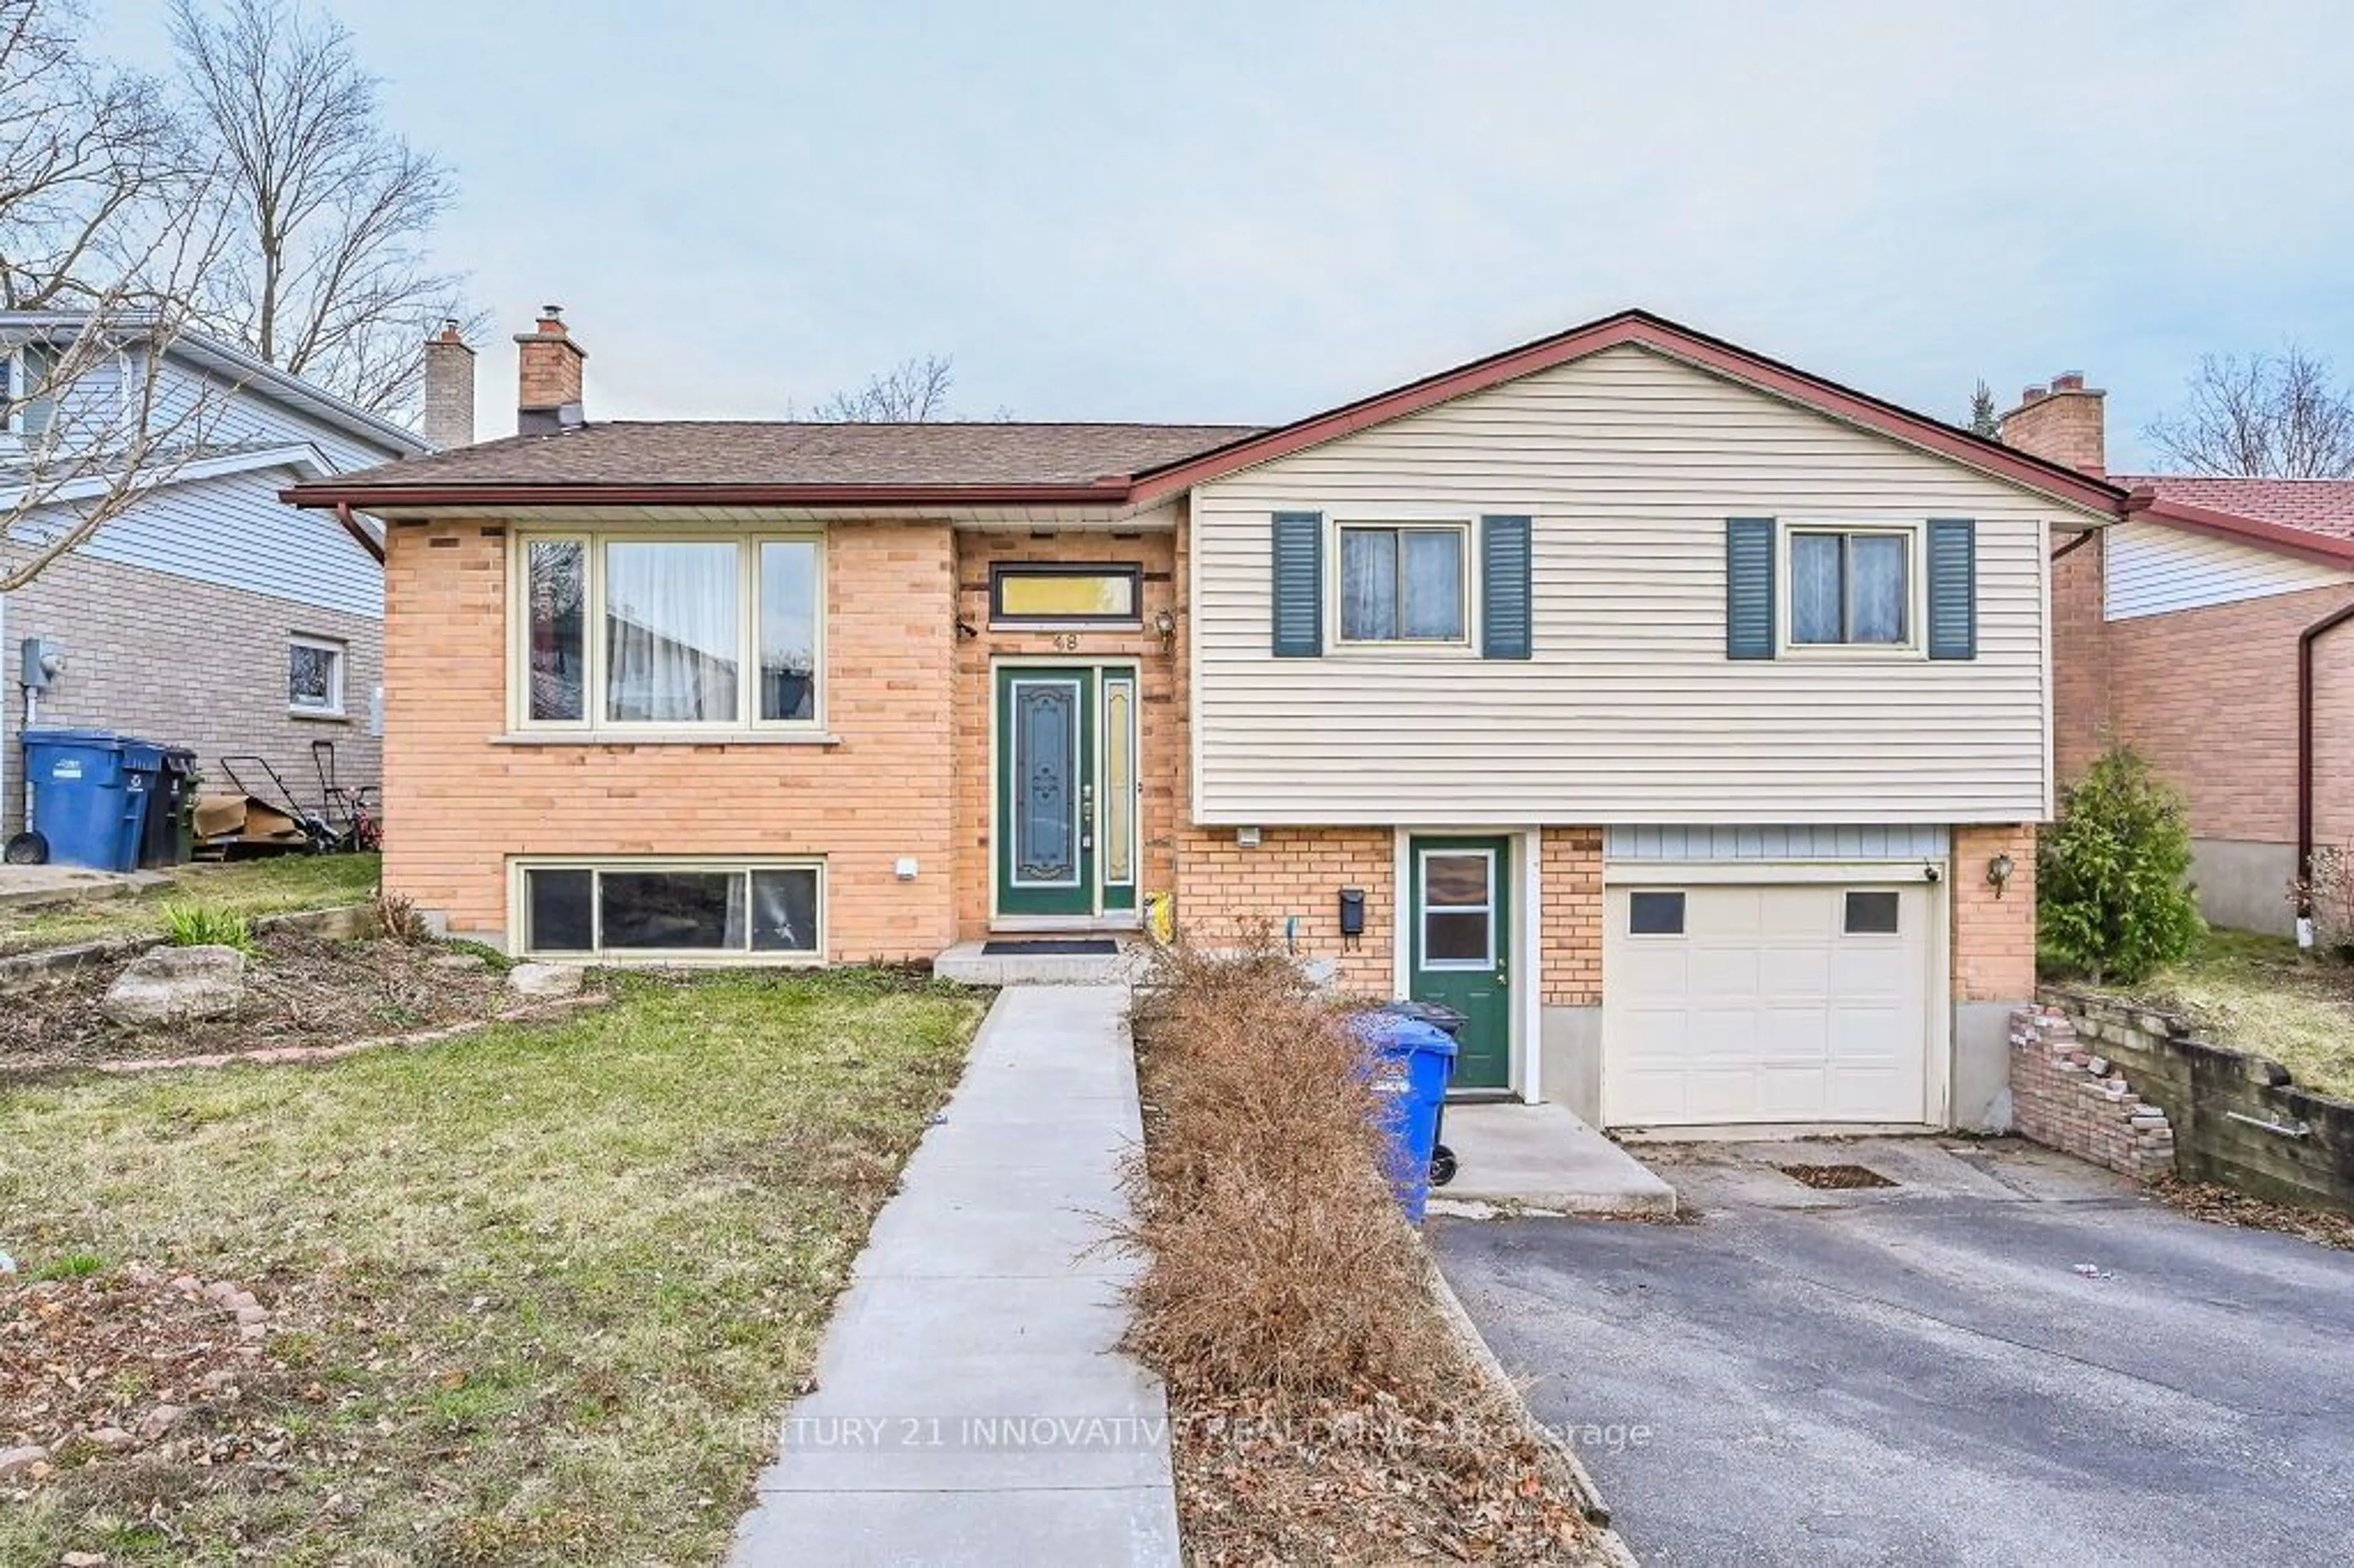 Home with brick exterior material for 48 Rochelle Dr, Guelph Ontario N1K 1L2